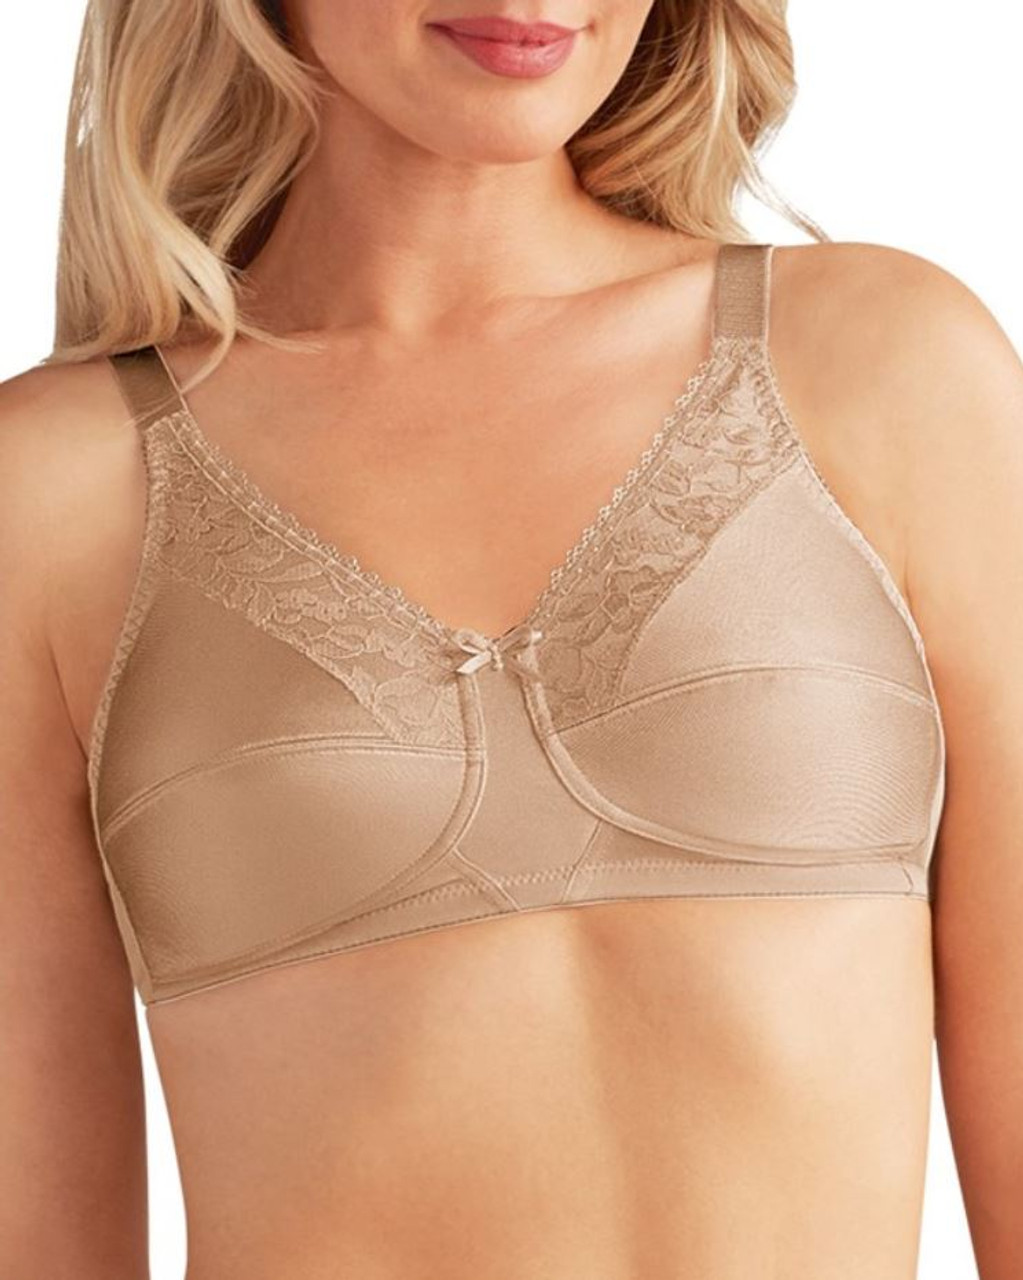  Womens Nancy Non-Wired Pocketed Mastectomy Bra Rose Nude 46G